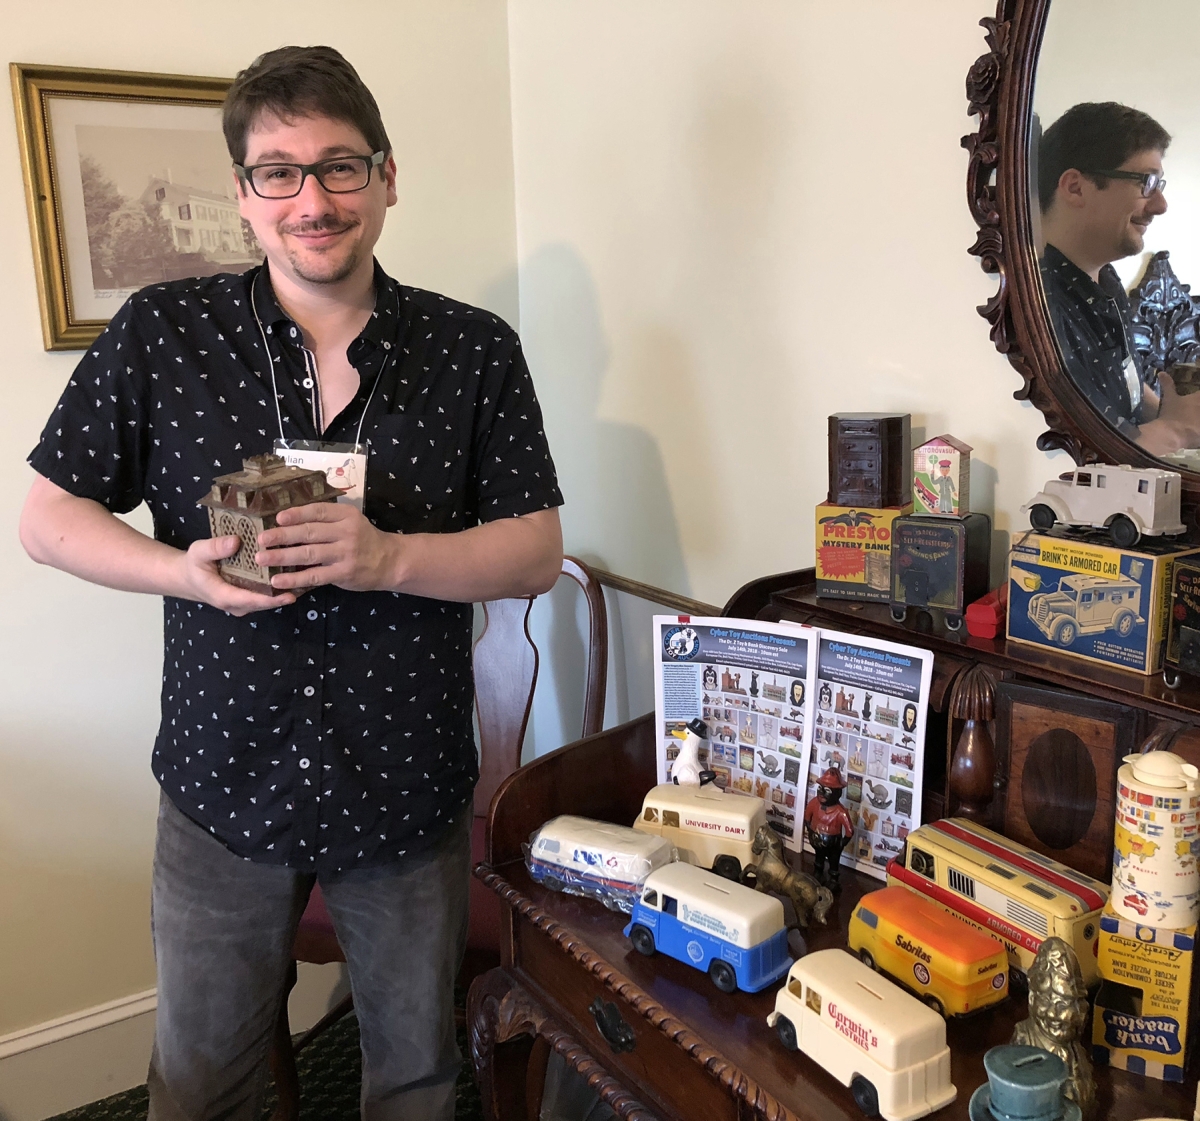 Julian Abernethy, photography and computer specialist at RSL, with a selection of banks and toys arranged in his room.